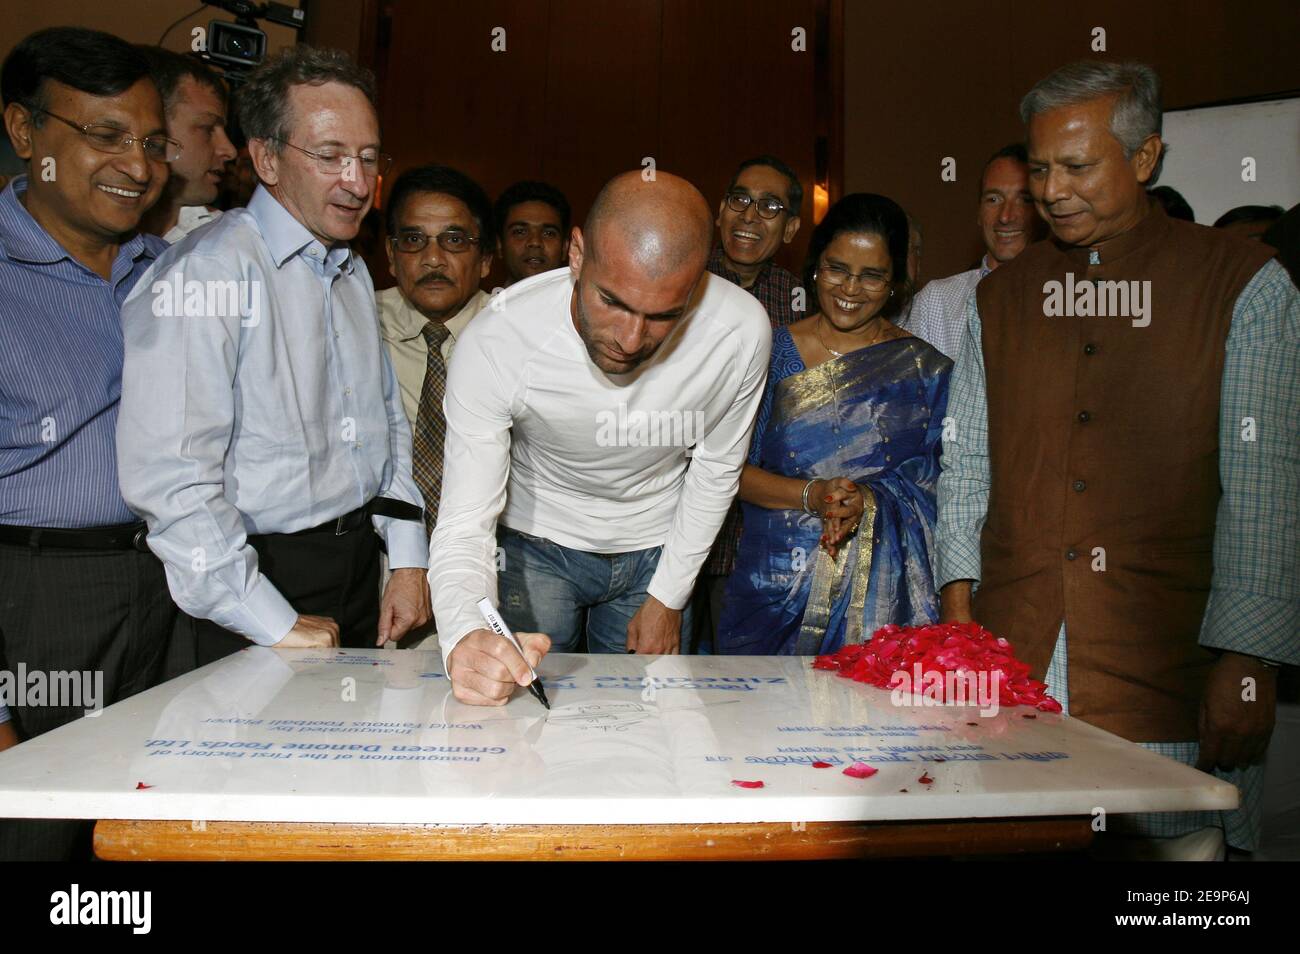 French football player Zinedine Zidane signs his autograph with Danone CEO Franck Riboud and Bangladeshi Nobel Peace Prize winner Muhammad Yunus on a stone as he officially opens a yogurt factory project run by French food giant Danone and Grameen Bank at a ceremony in Dhaka, Bangladesh on November 8, 2006. The project set up in the northern Bangladesh town of Bogra will produce nutritious food products for the people in the low income area. Photo by Patrick Durand/Cameleon/ABACAPRESS.COM Stock Photo